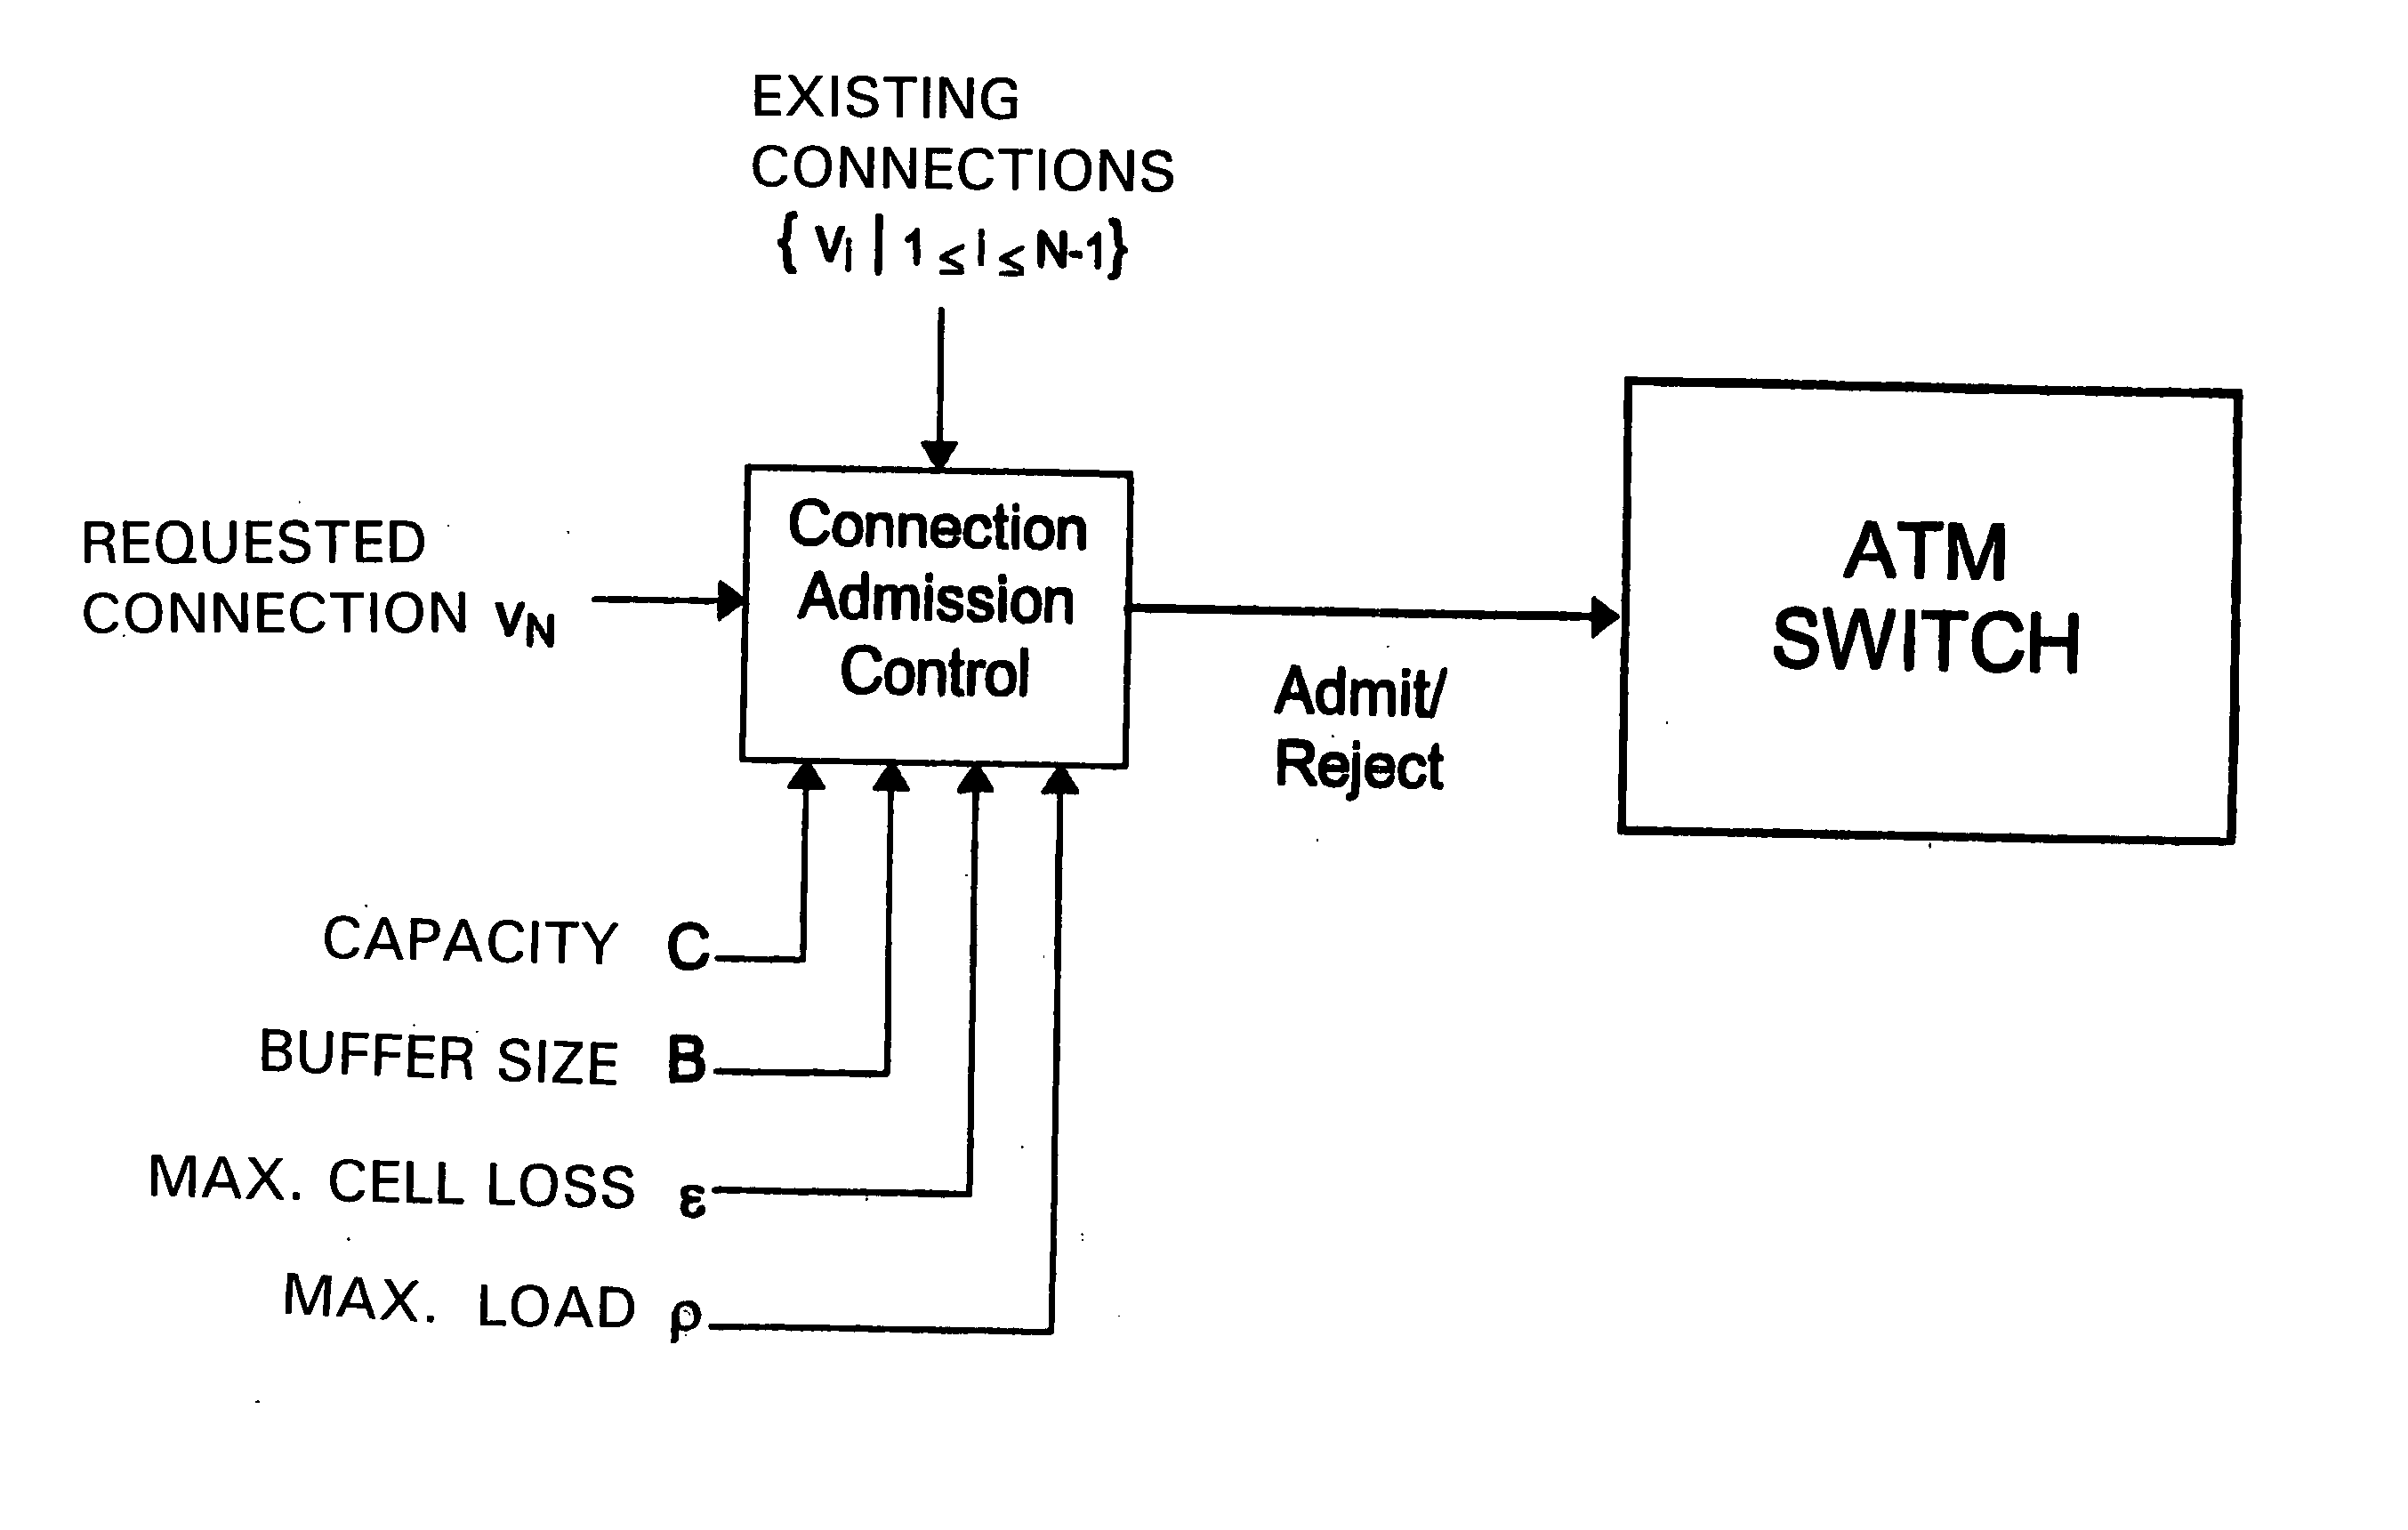 ATM connection admission control device for DBR connections